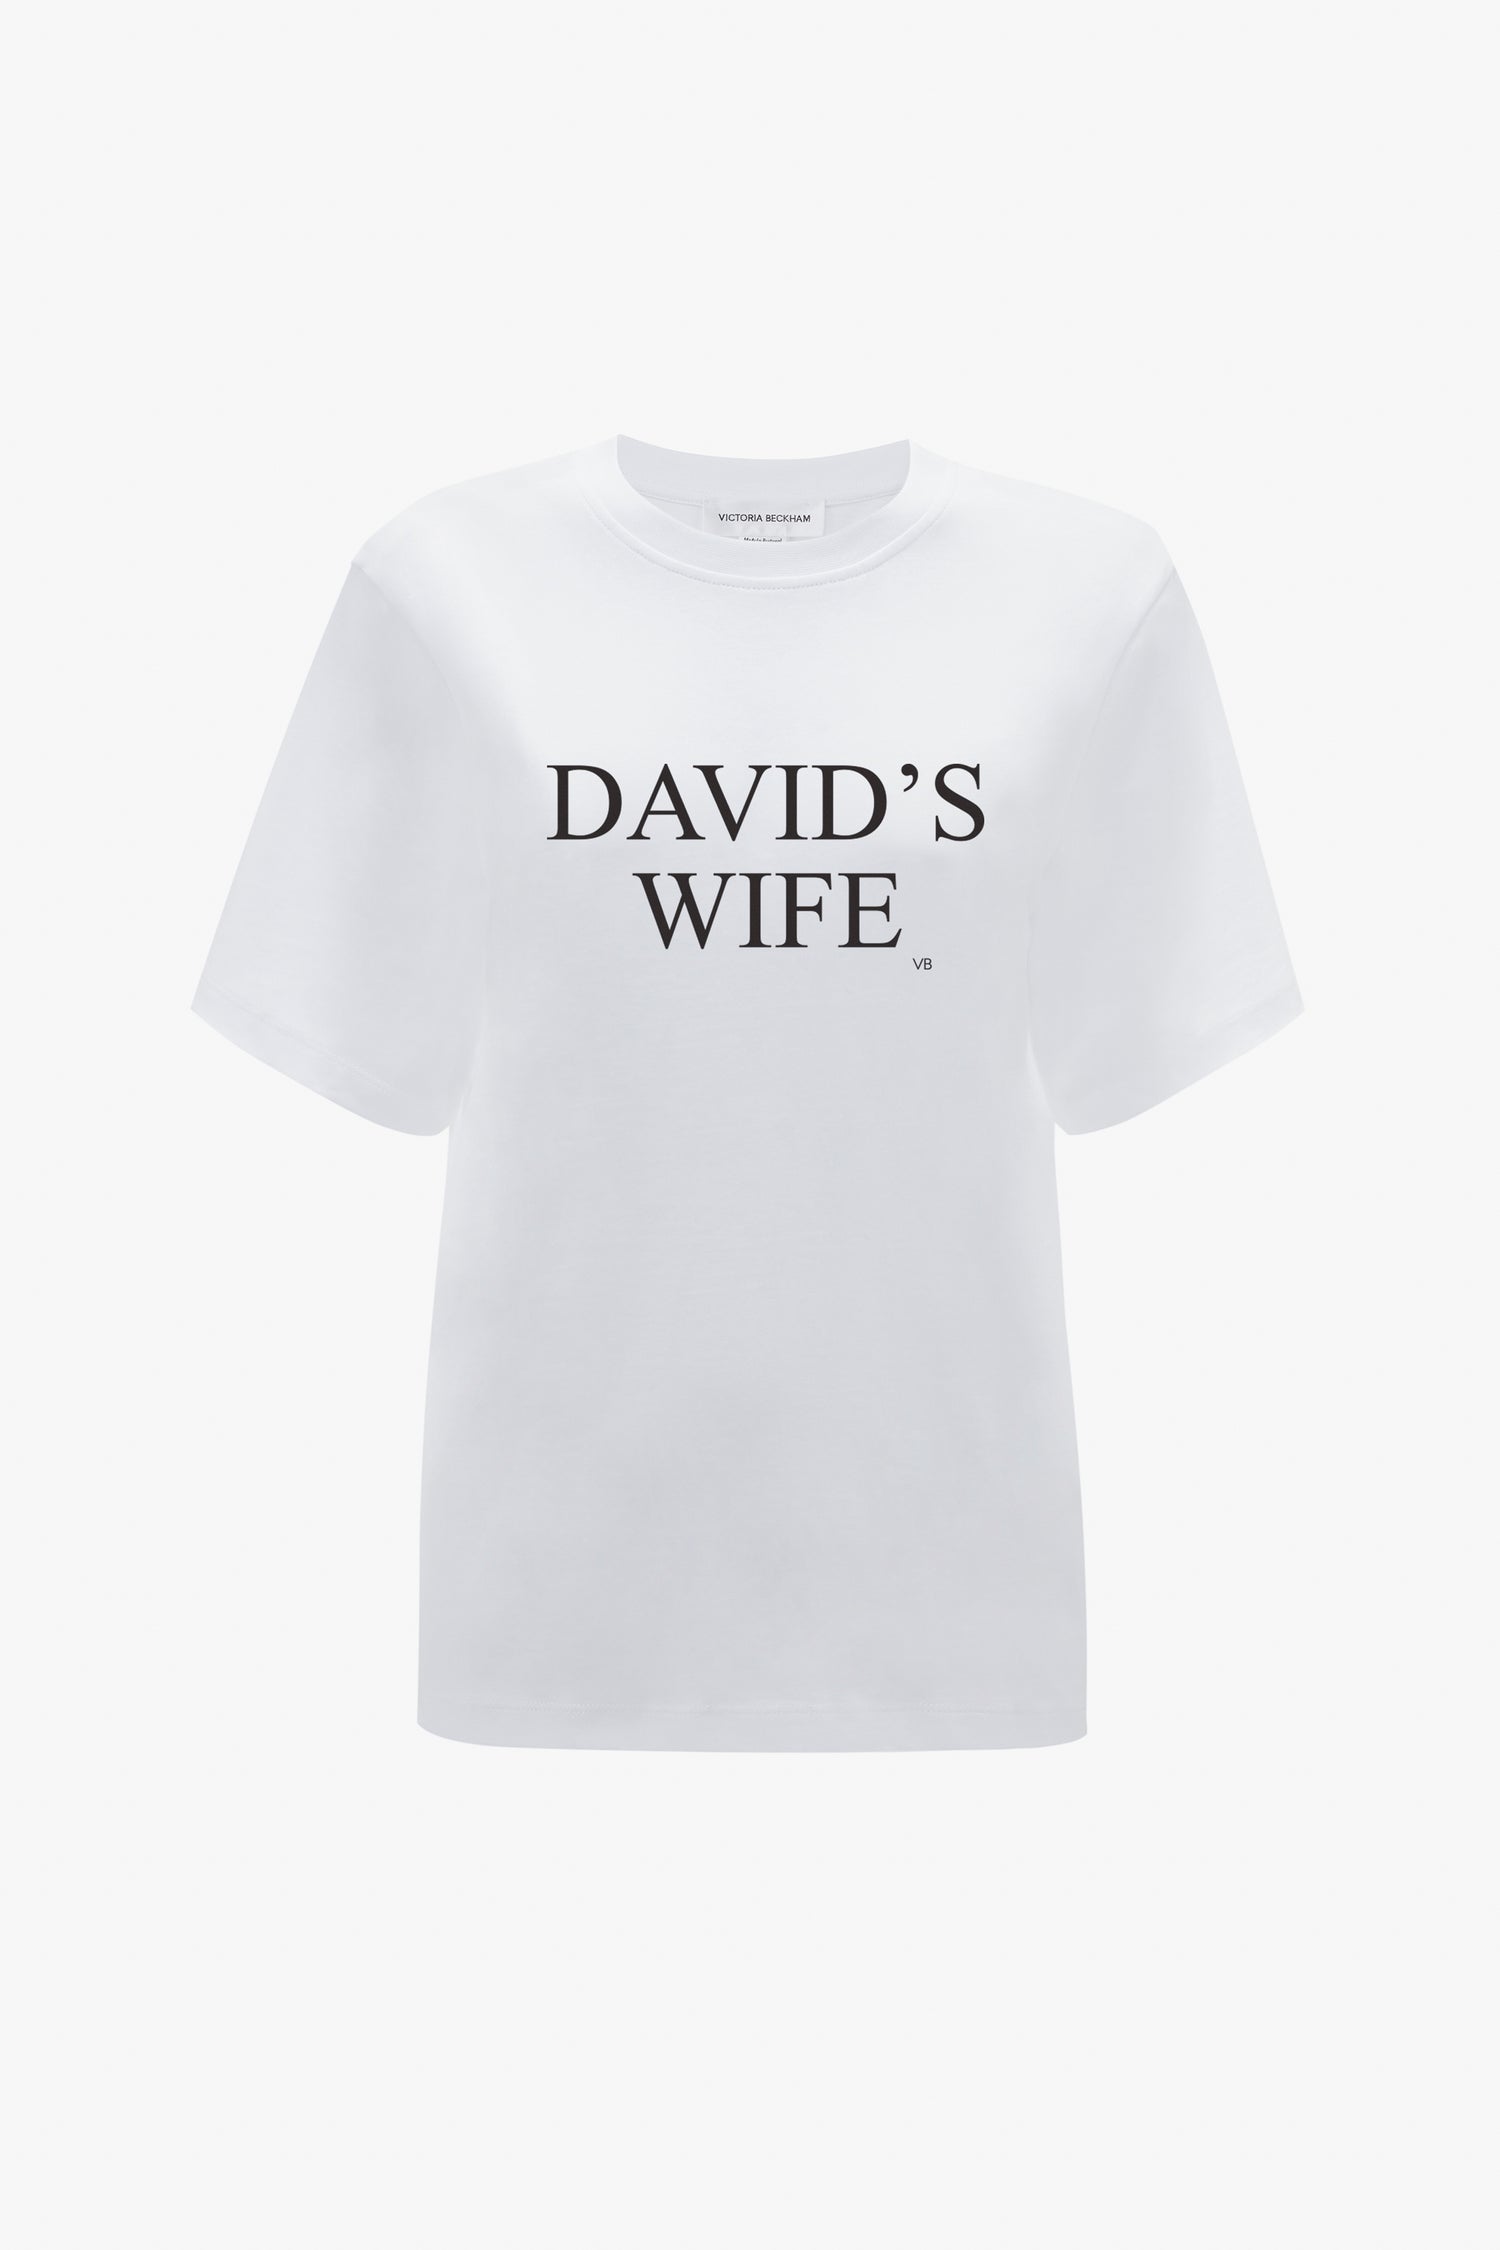 White 'David's Wife' slogan T-shirt made of organic cotton with the phrase printed in black font on the chest by Victoria Beckham.